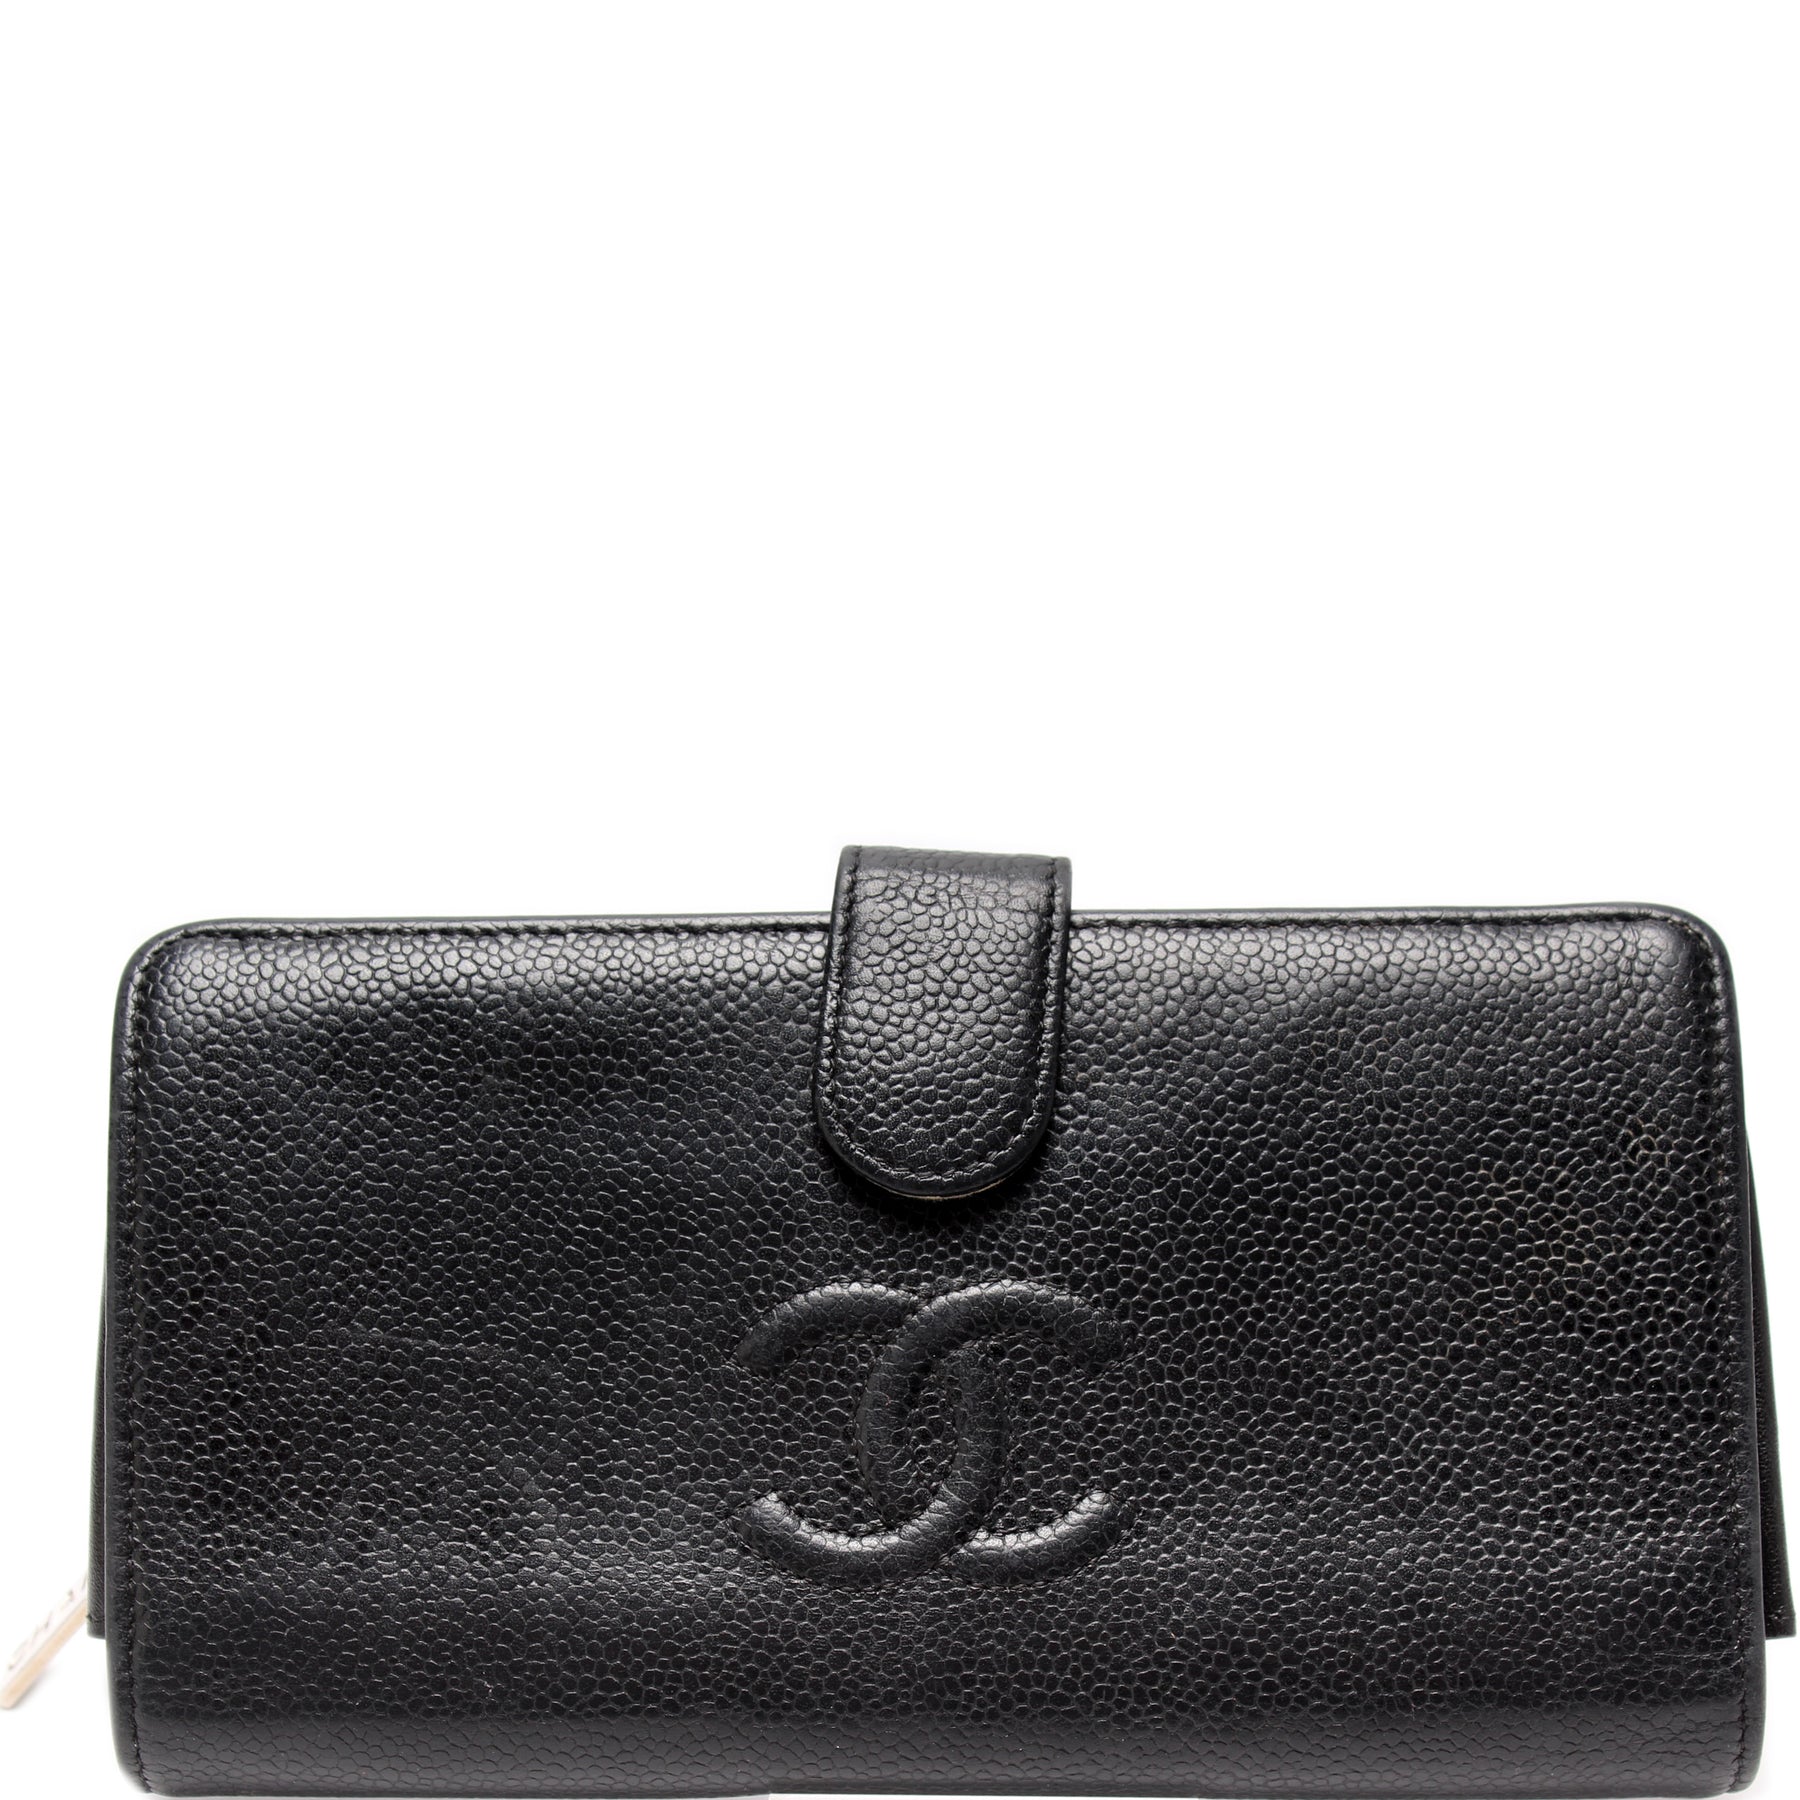 CHANEL, Bags, Chanel Cc Button Compact Bifold Wallet